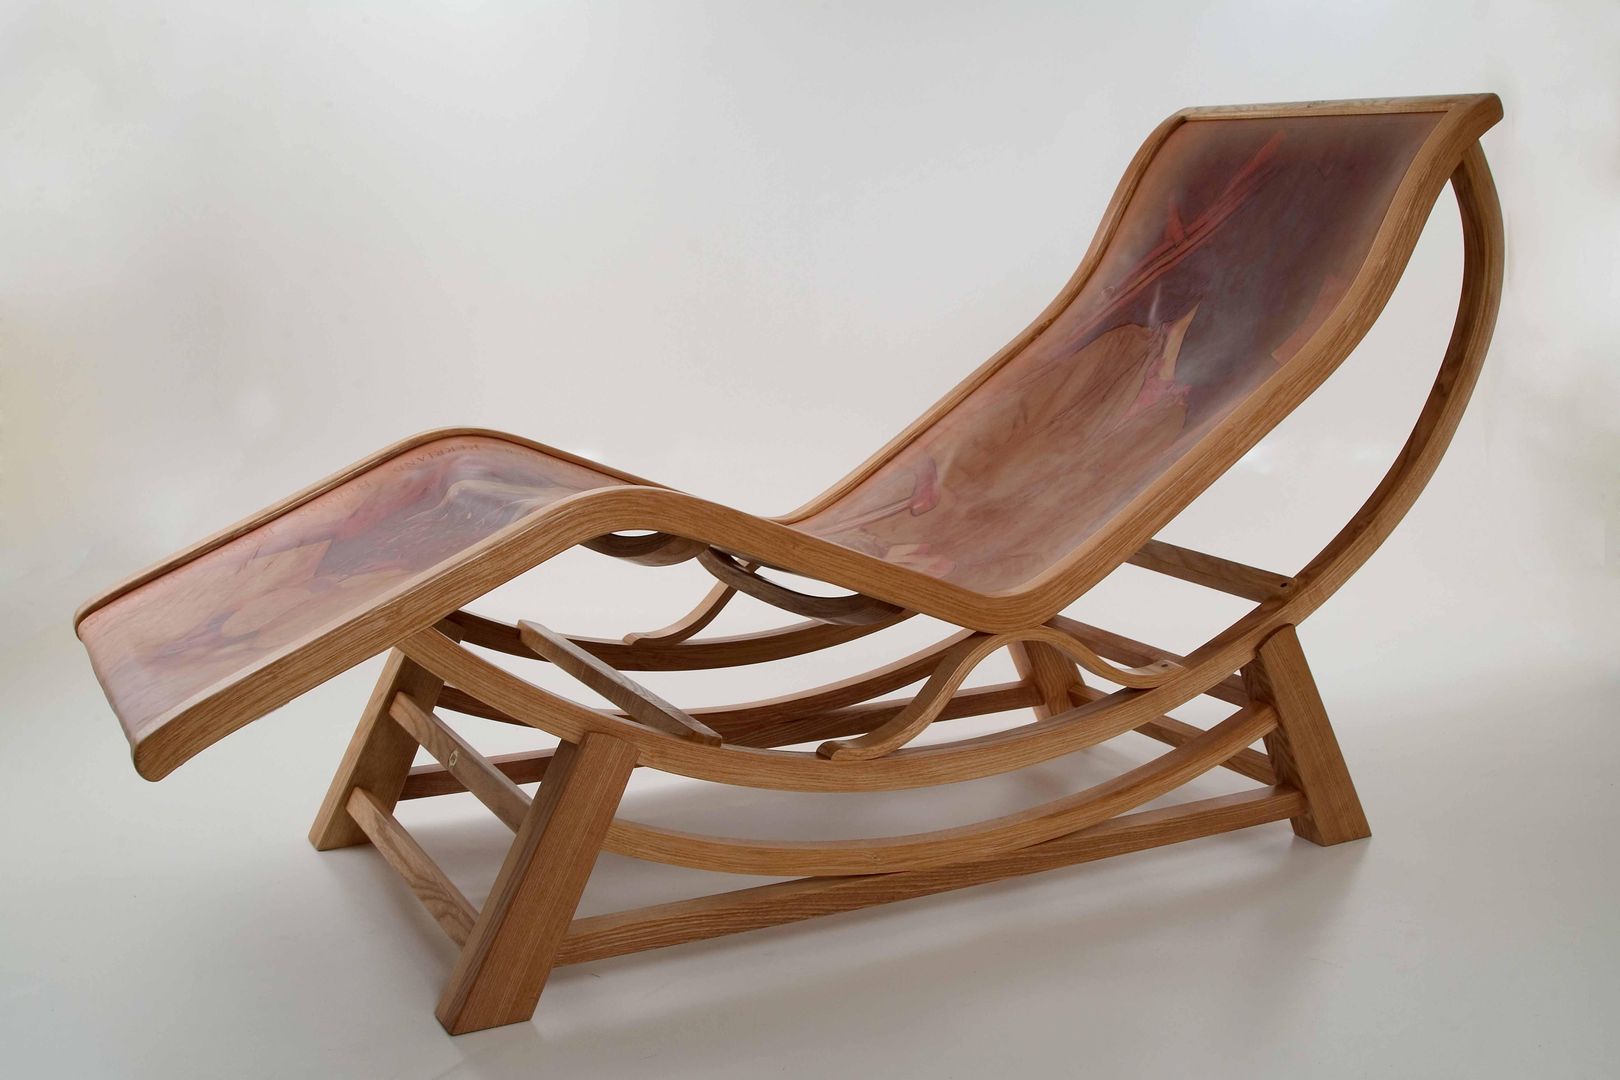 Corbusier-inspired chaise longue by Bruce Burman homify Dormitorios clásicos Sofas y chaise long